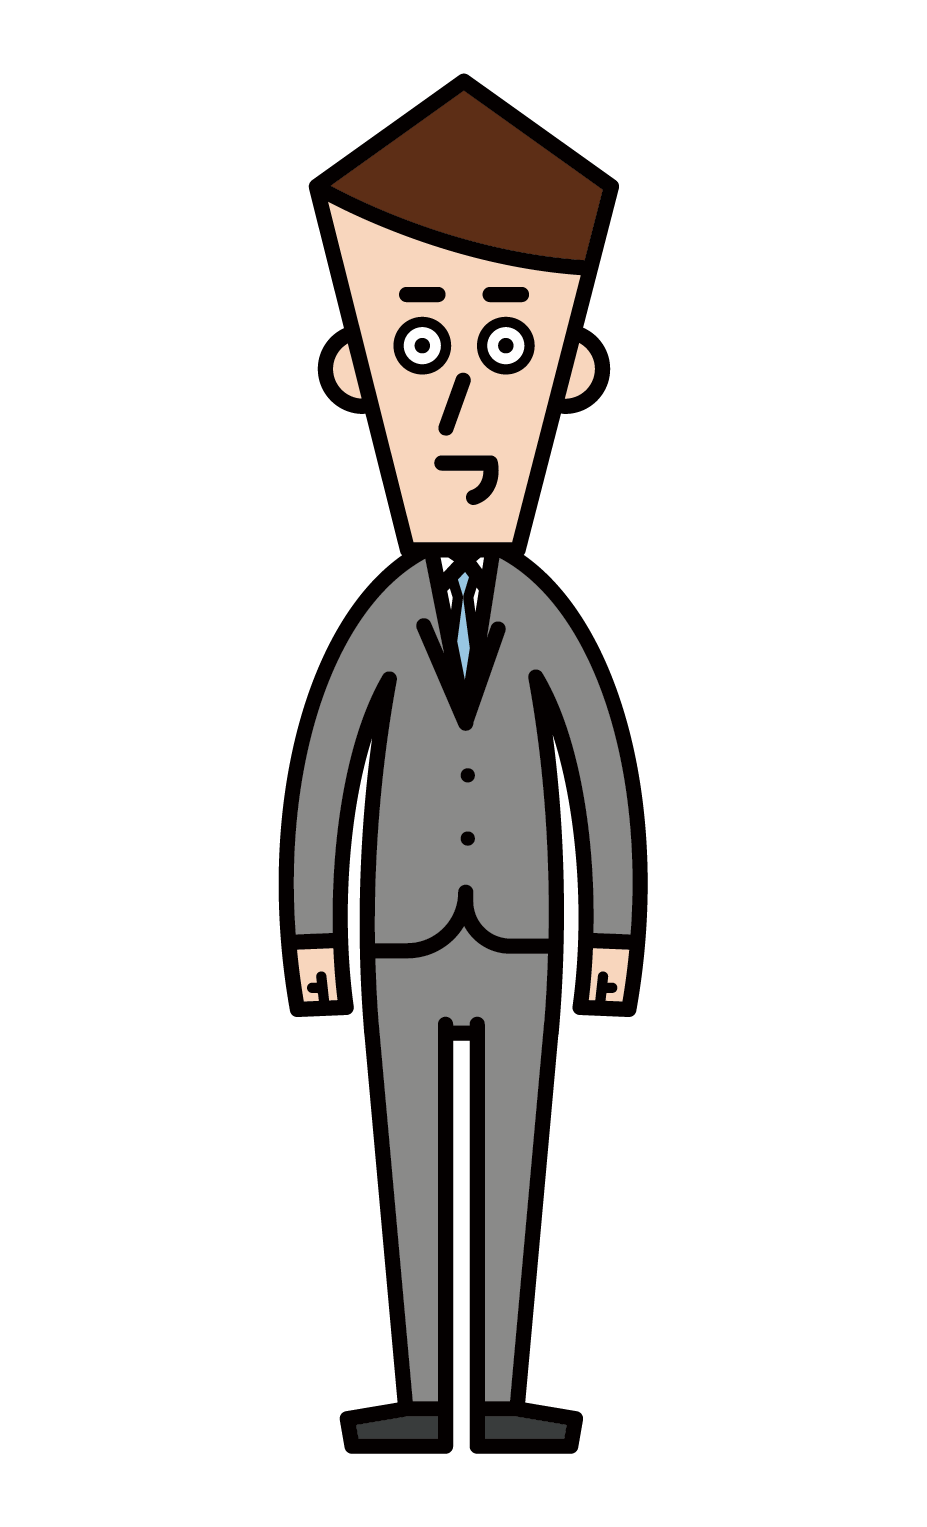 Illustration of a man in a suit